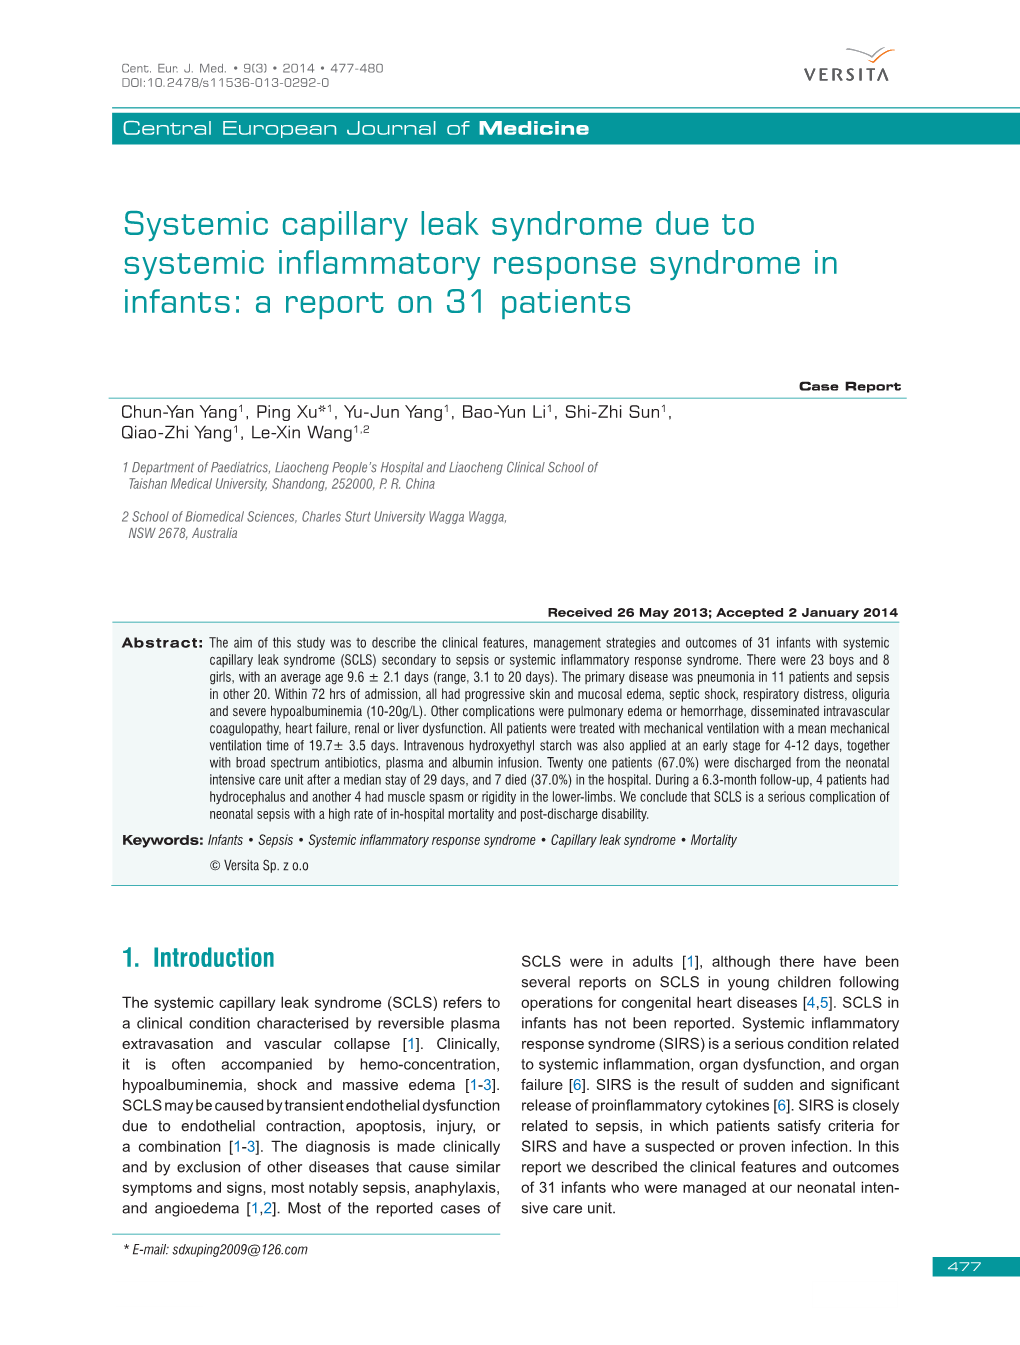 Systemic Capillary Leak Syndrome Due to Systemic Inflammatory Response Syndrome in Infants: a Report on 31 Patients